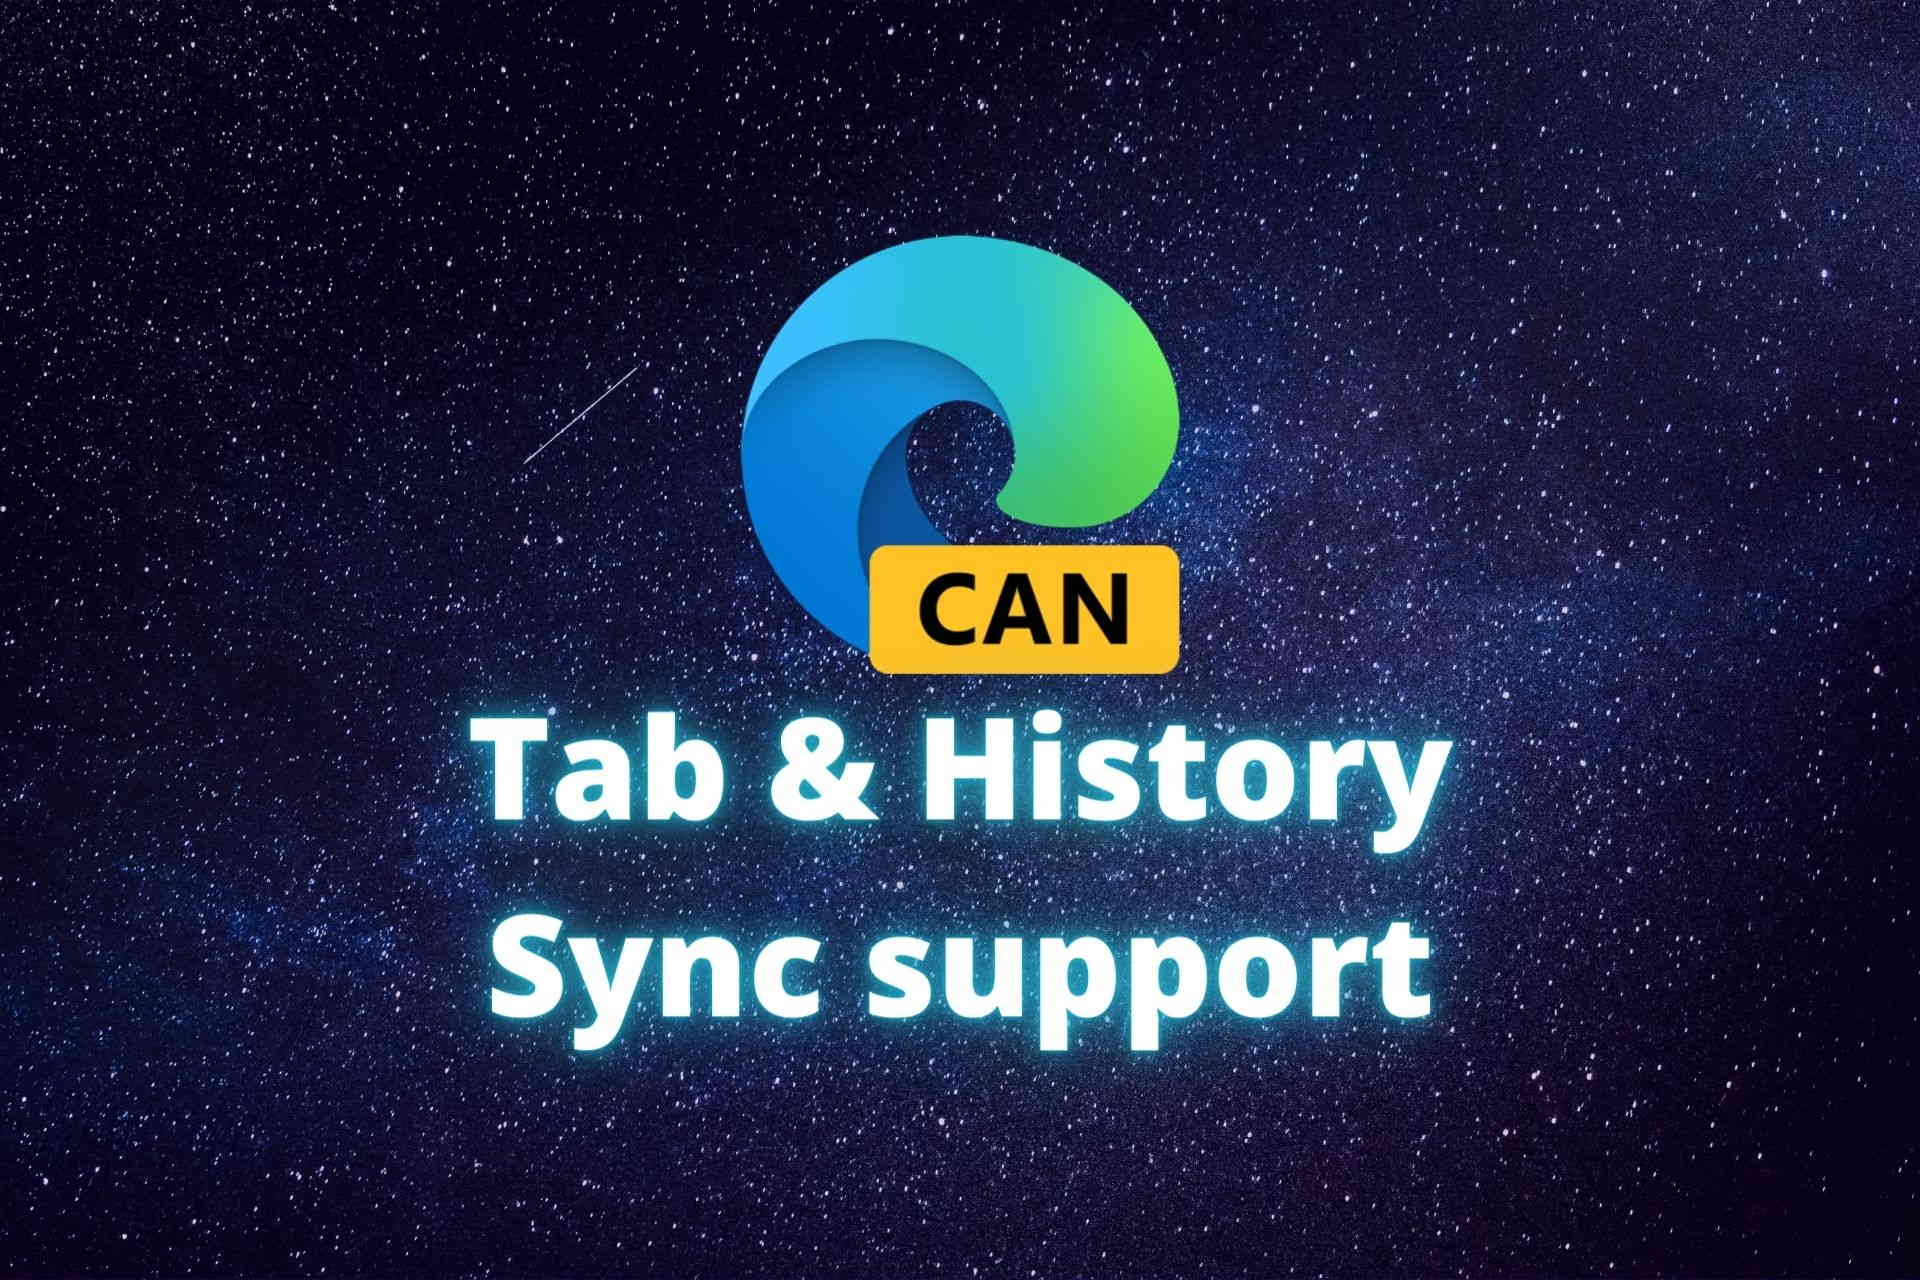 Edge Canary Tab & History Sync support